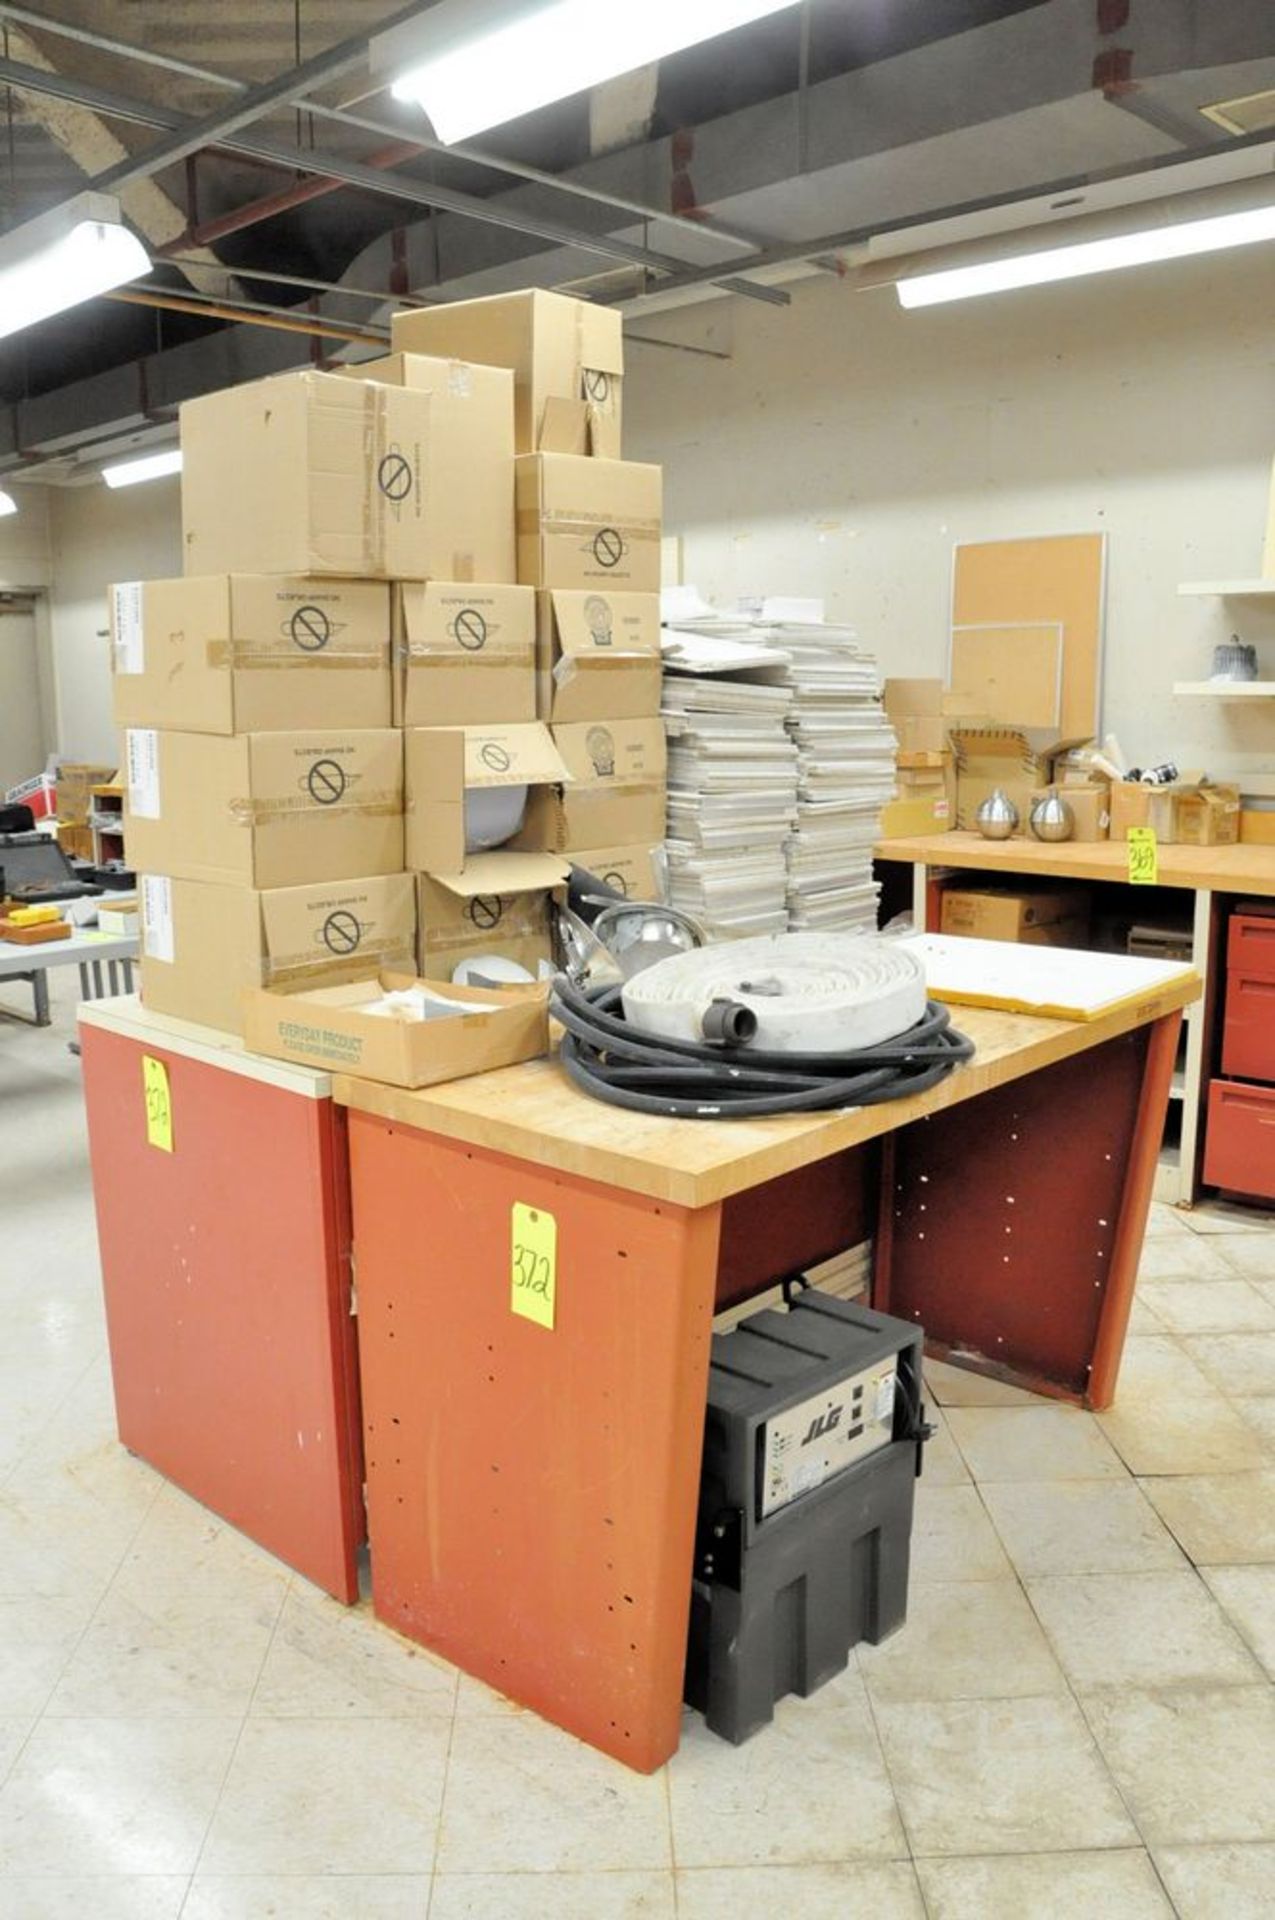 Lot-(2) Red Work Benches with Ceiling Tiles and Towel Dispensers, (Fire Extinguishers Not Included),